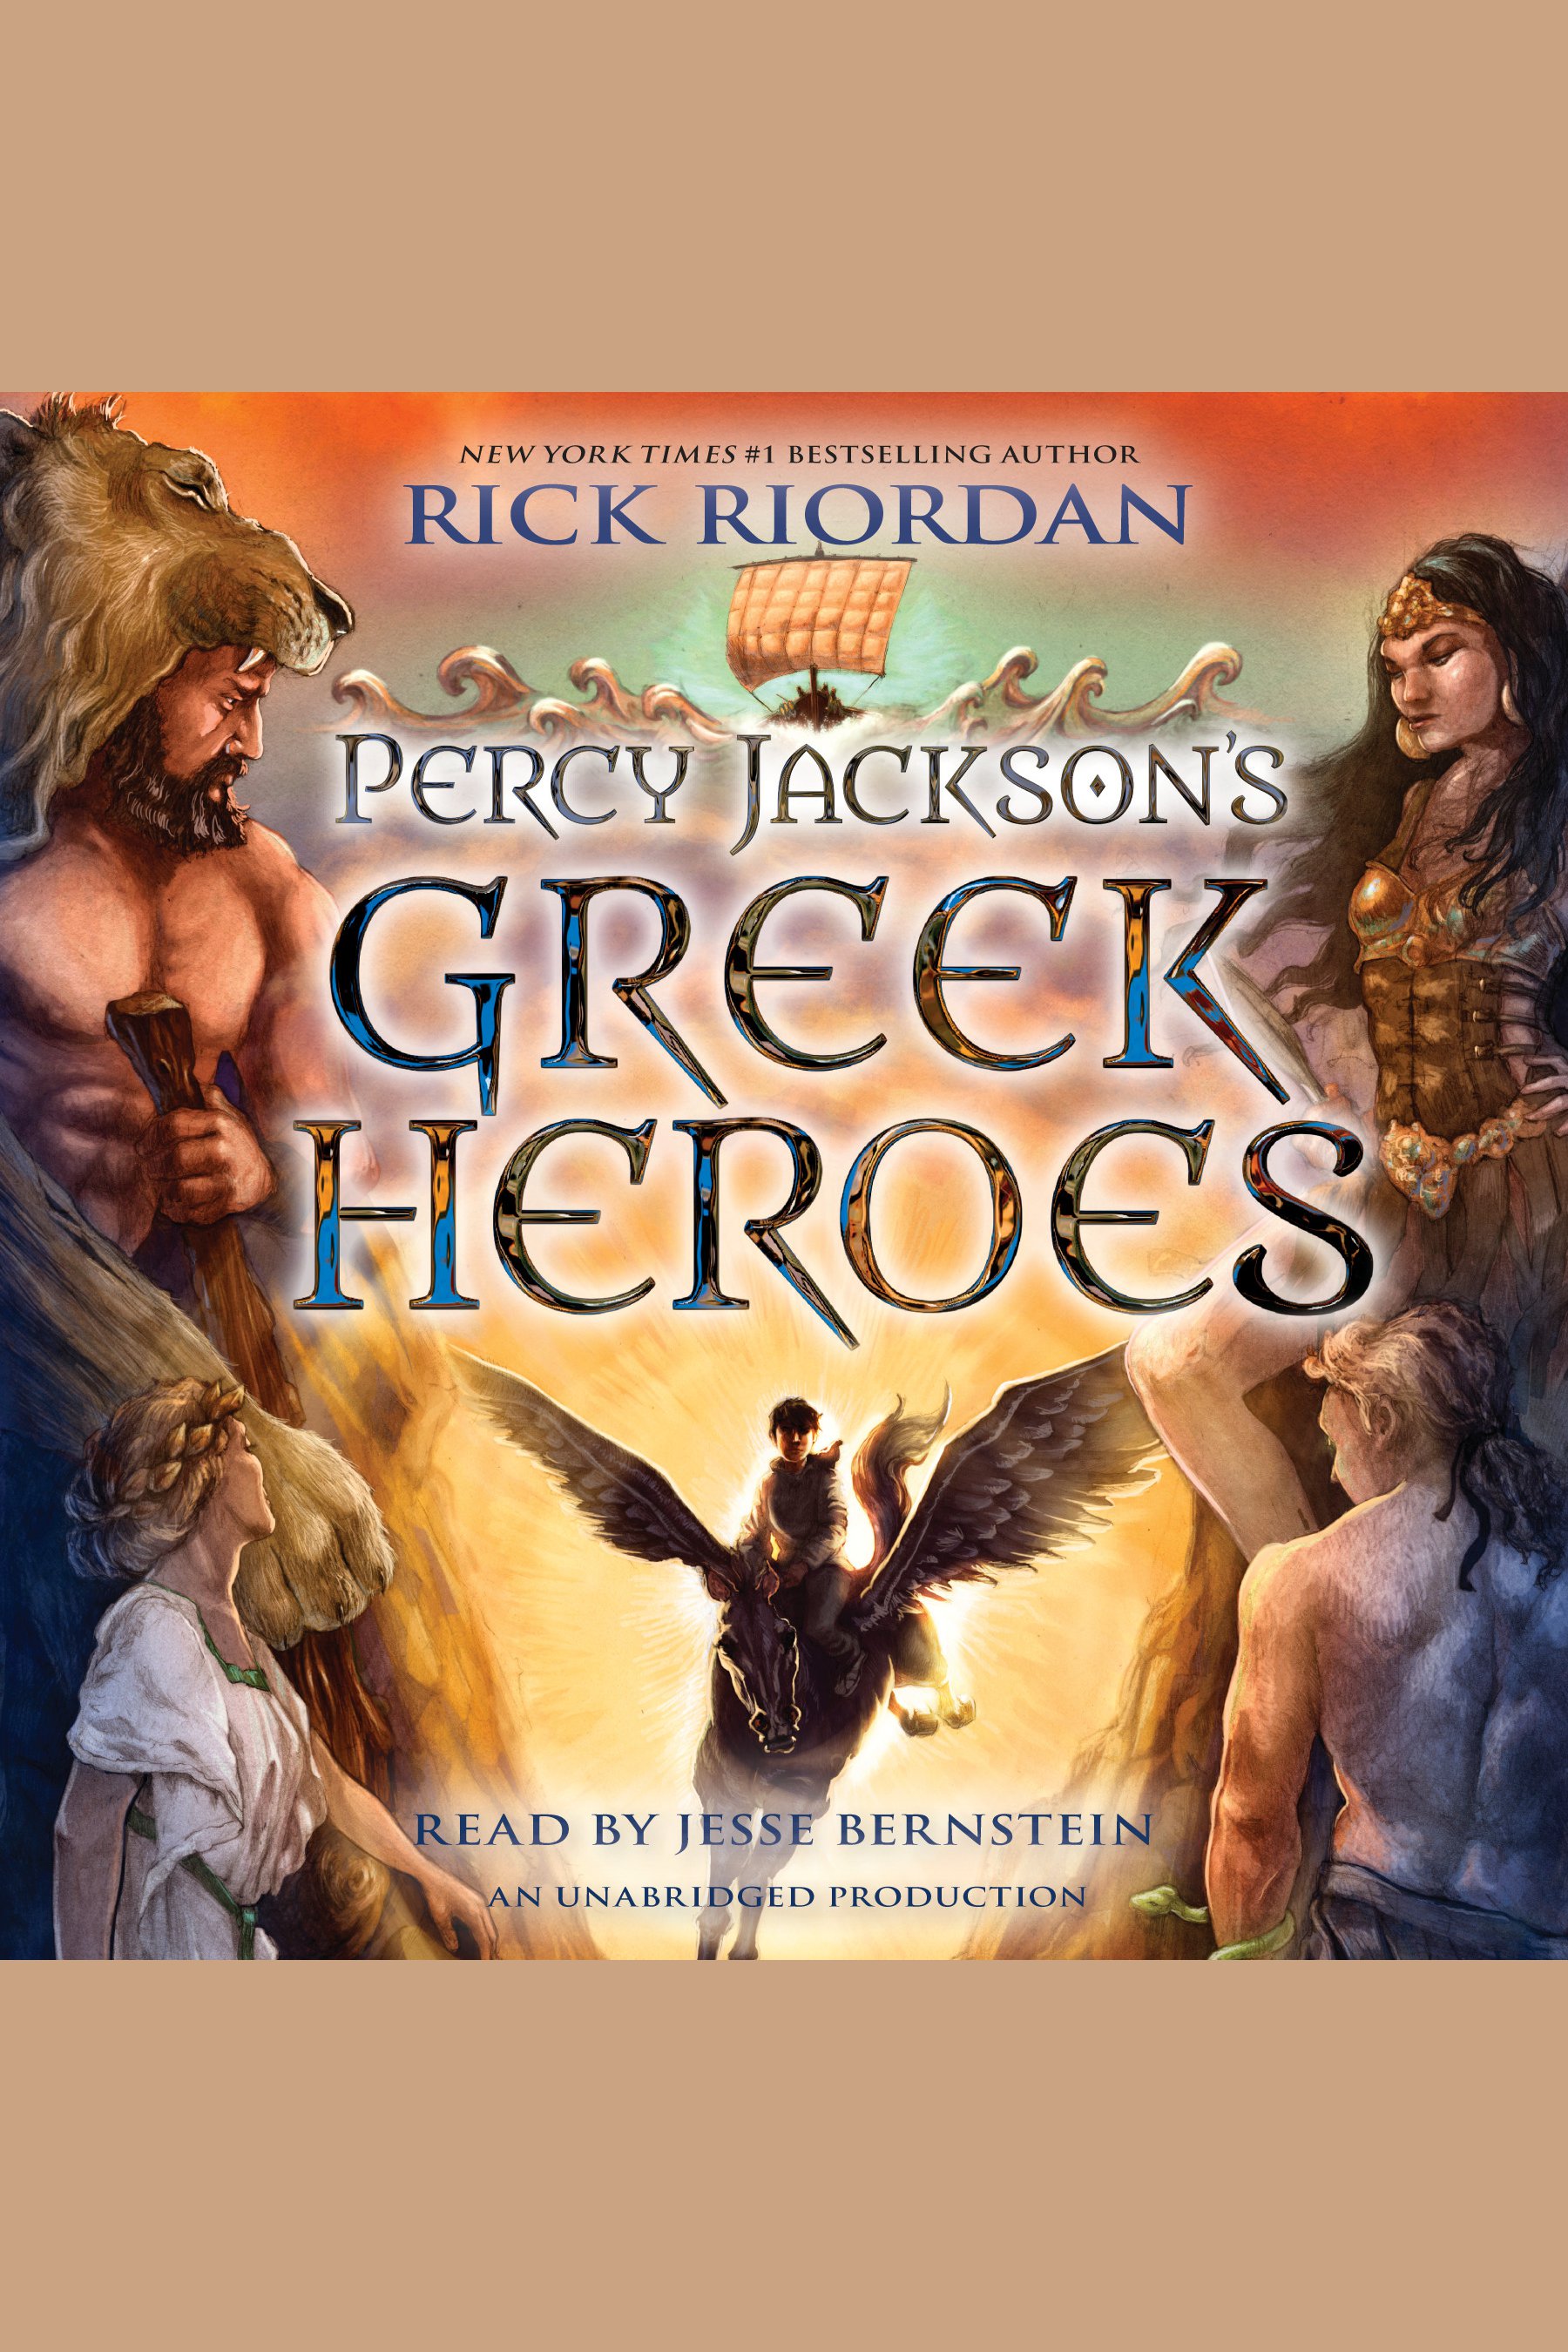 Percy Jackson's Greek heroes cover image